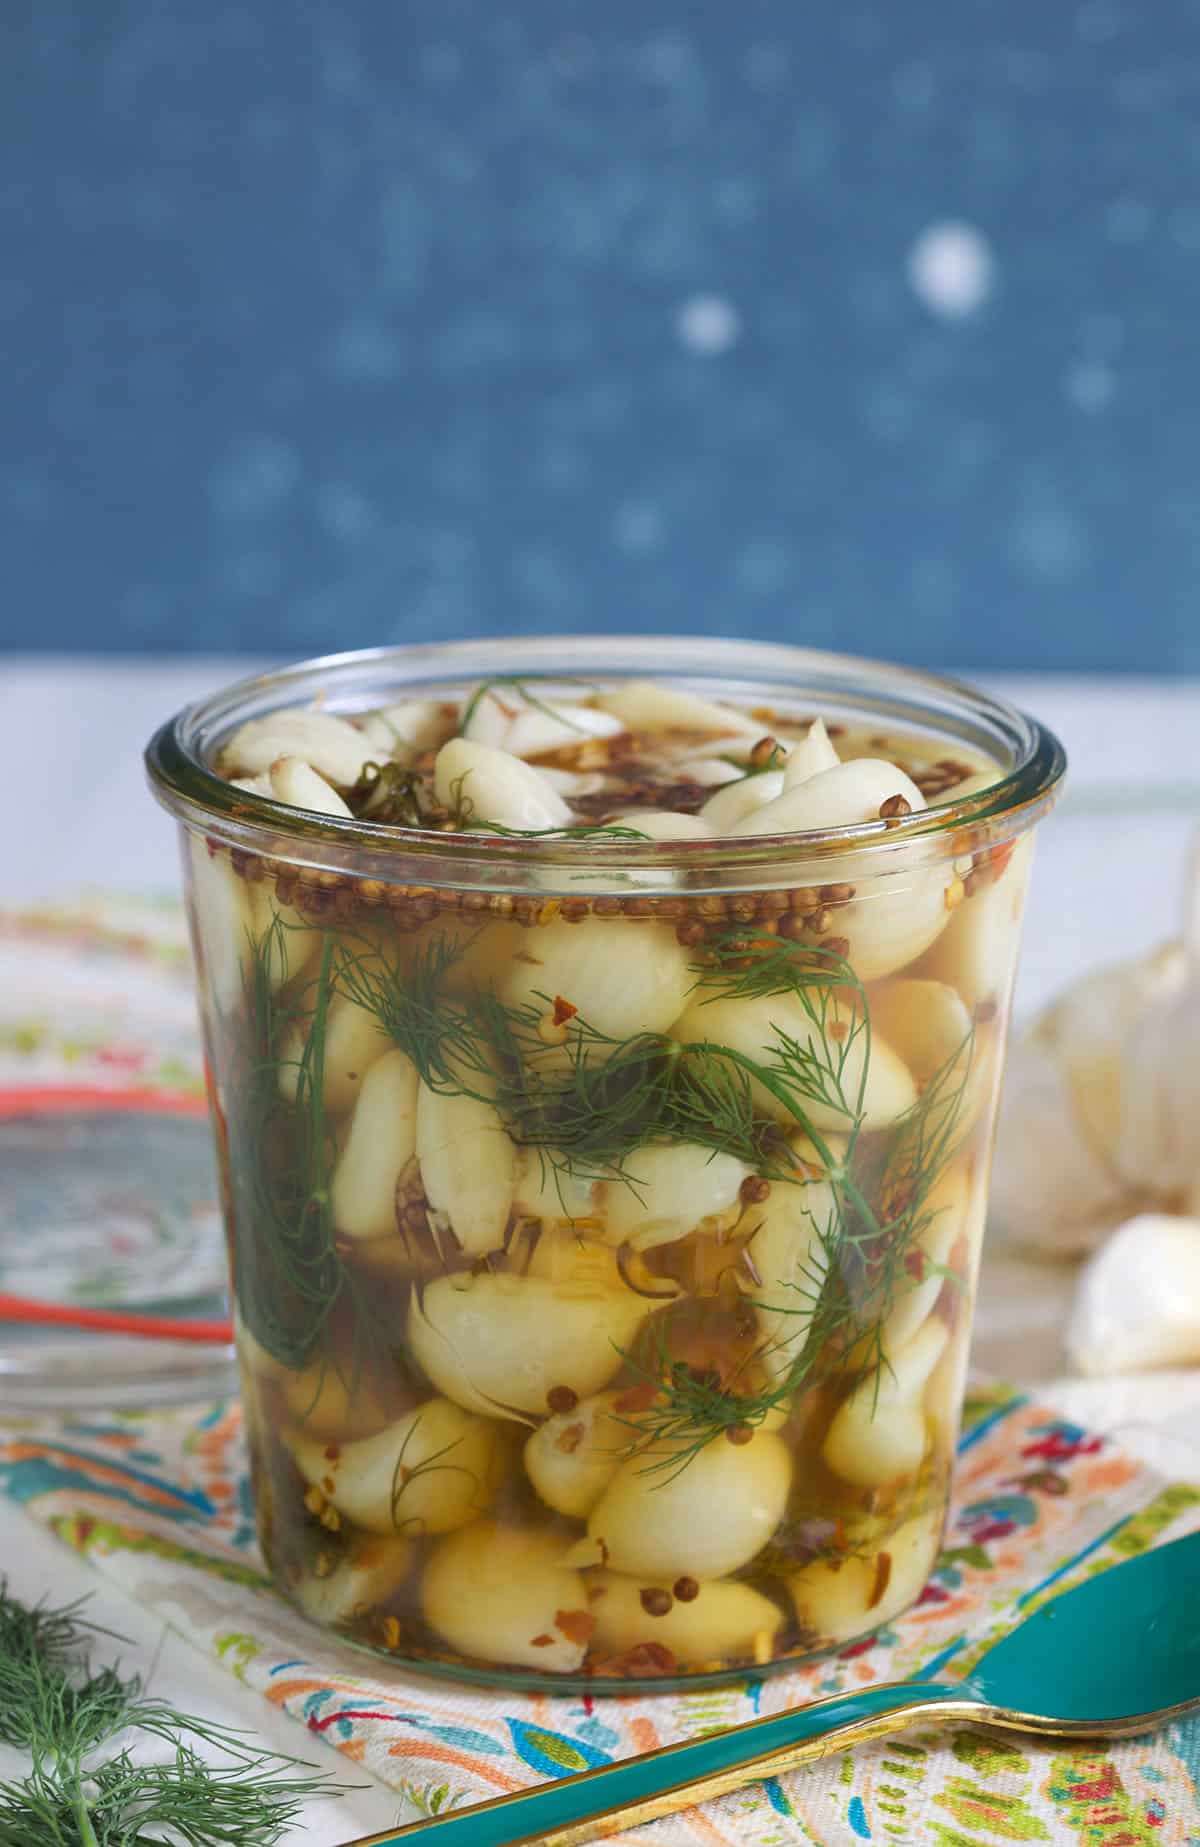 An open jar of pickled garlic is presented on a white and blue surface.